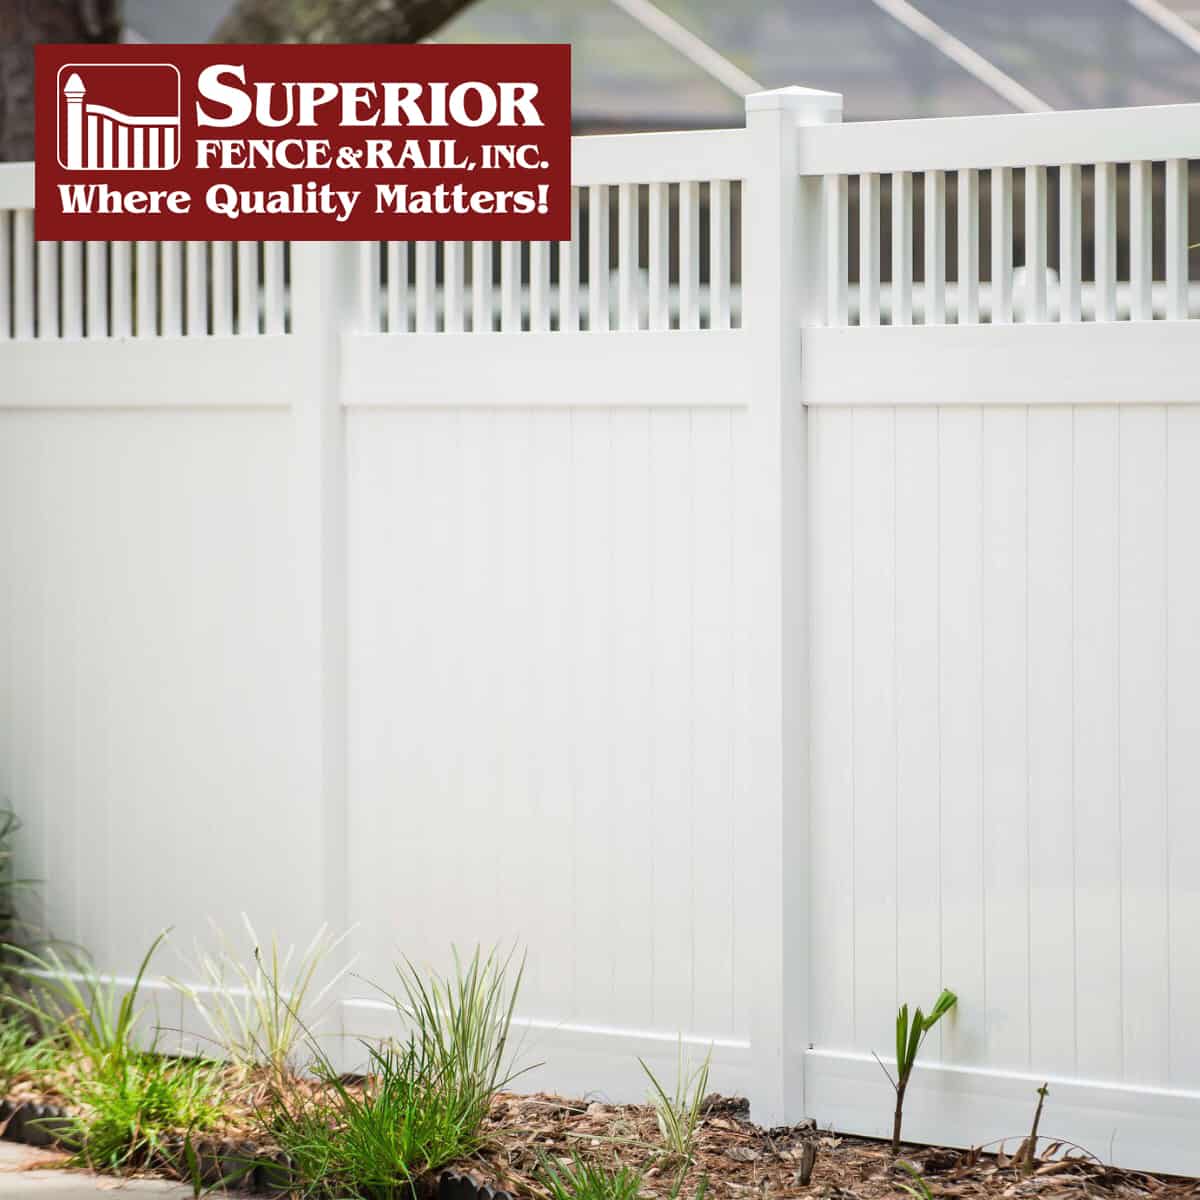 Long Island Fence Company Contractor